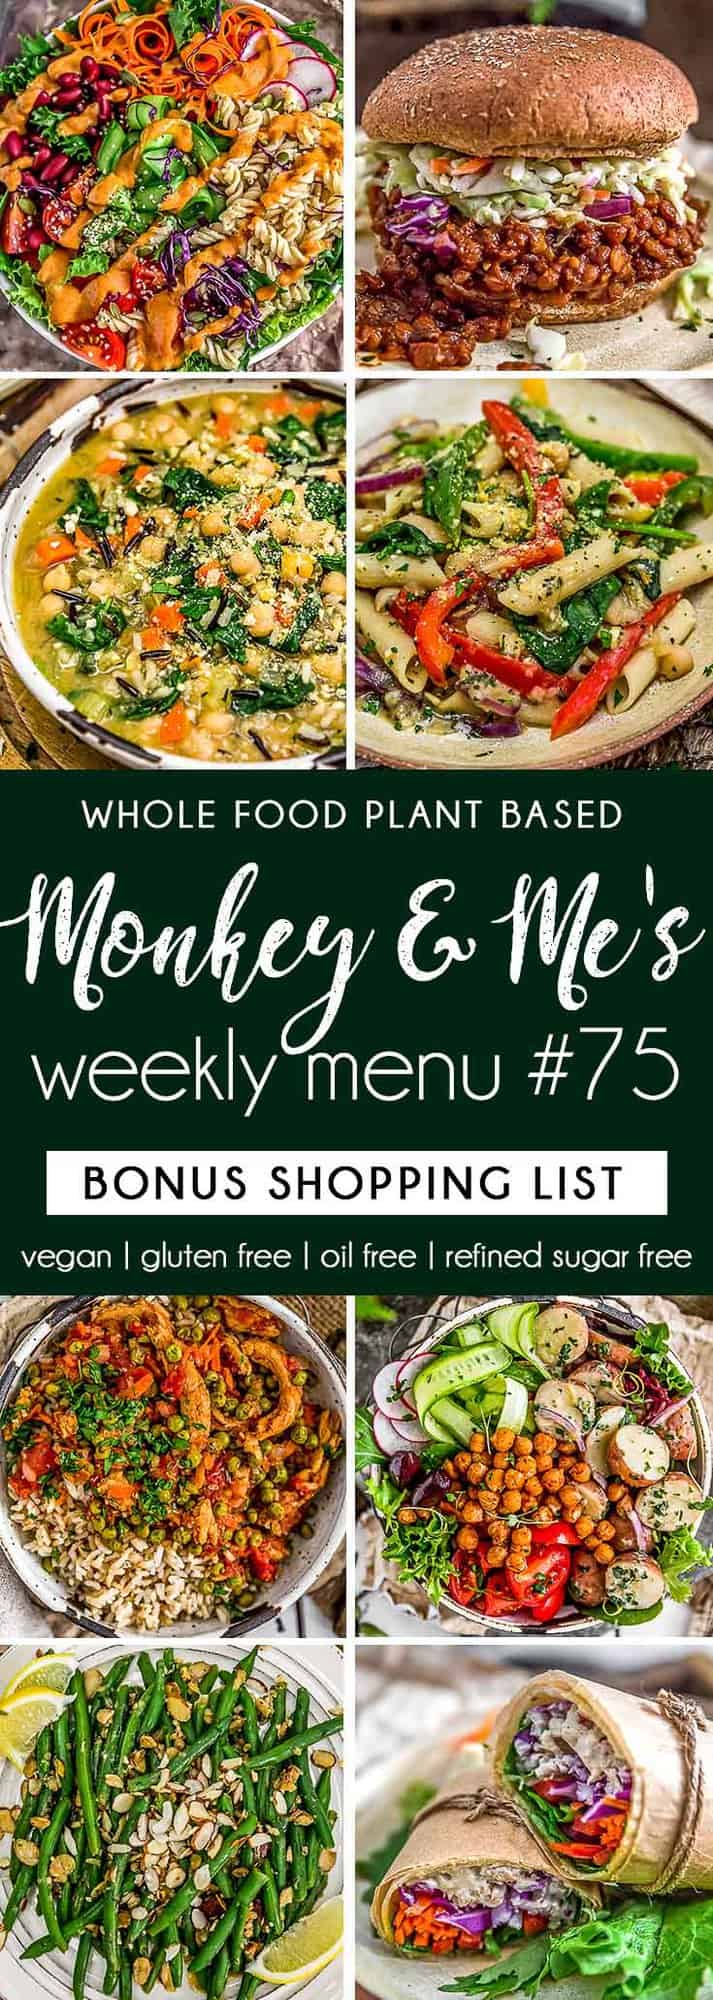 Monkey and Me's Menu 75 featuring 8 recipes